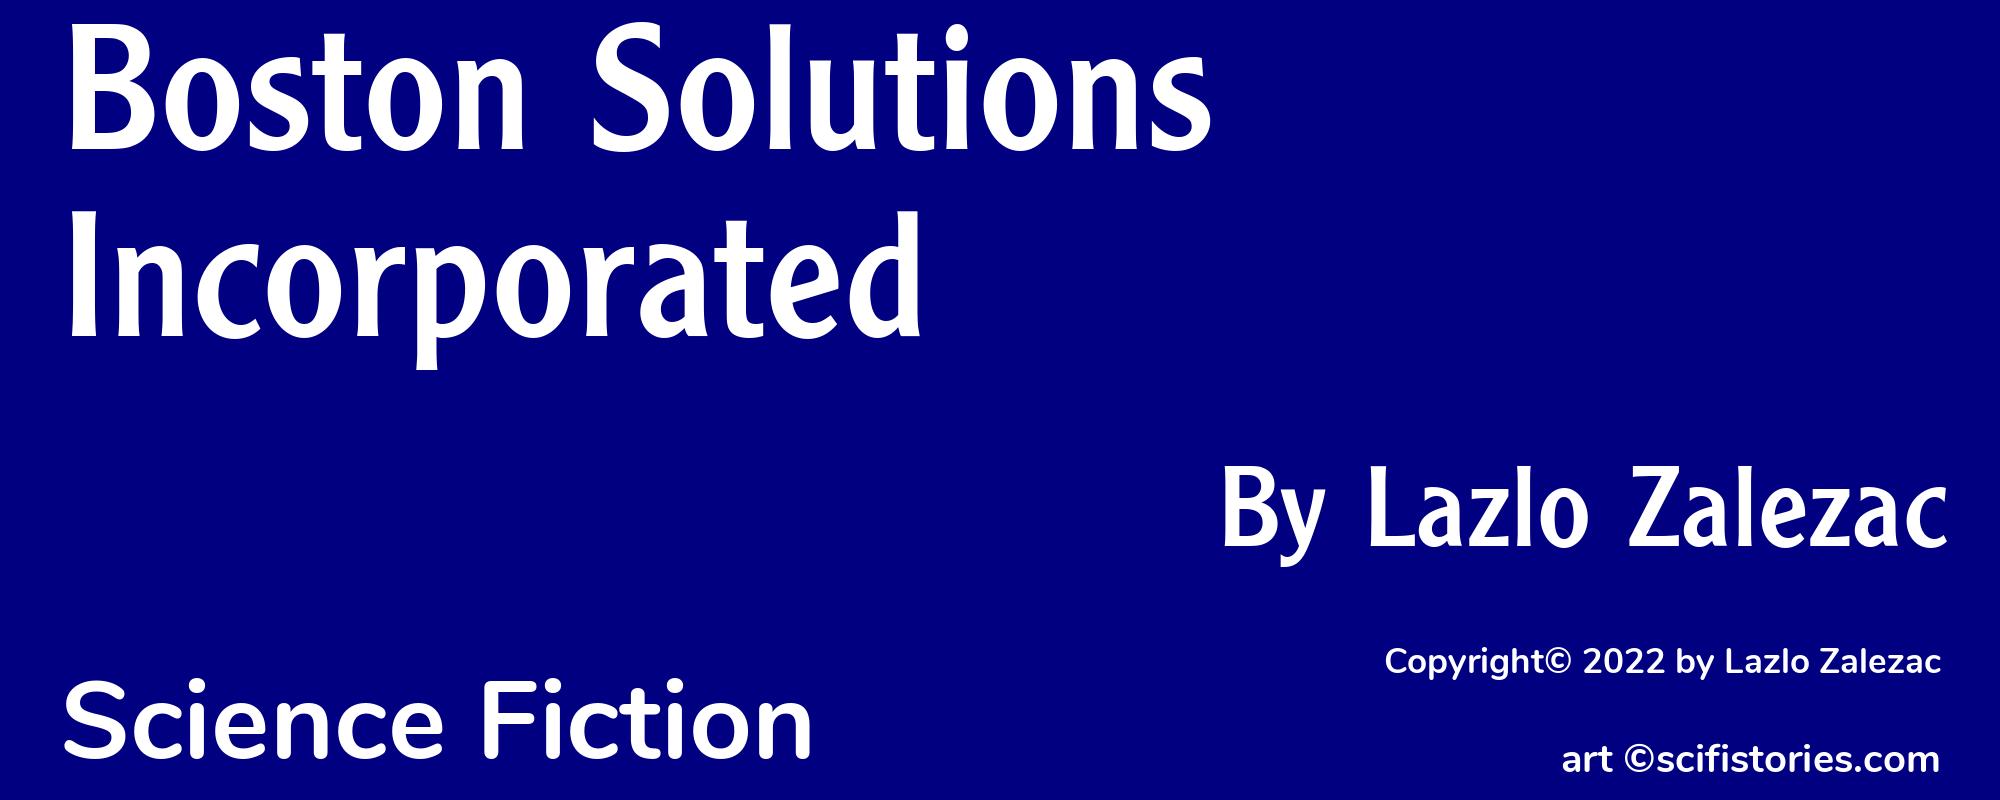 Boston Solutions Incorporated - Cover